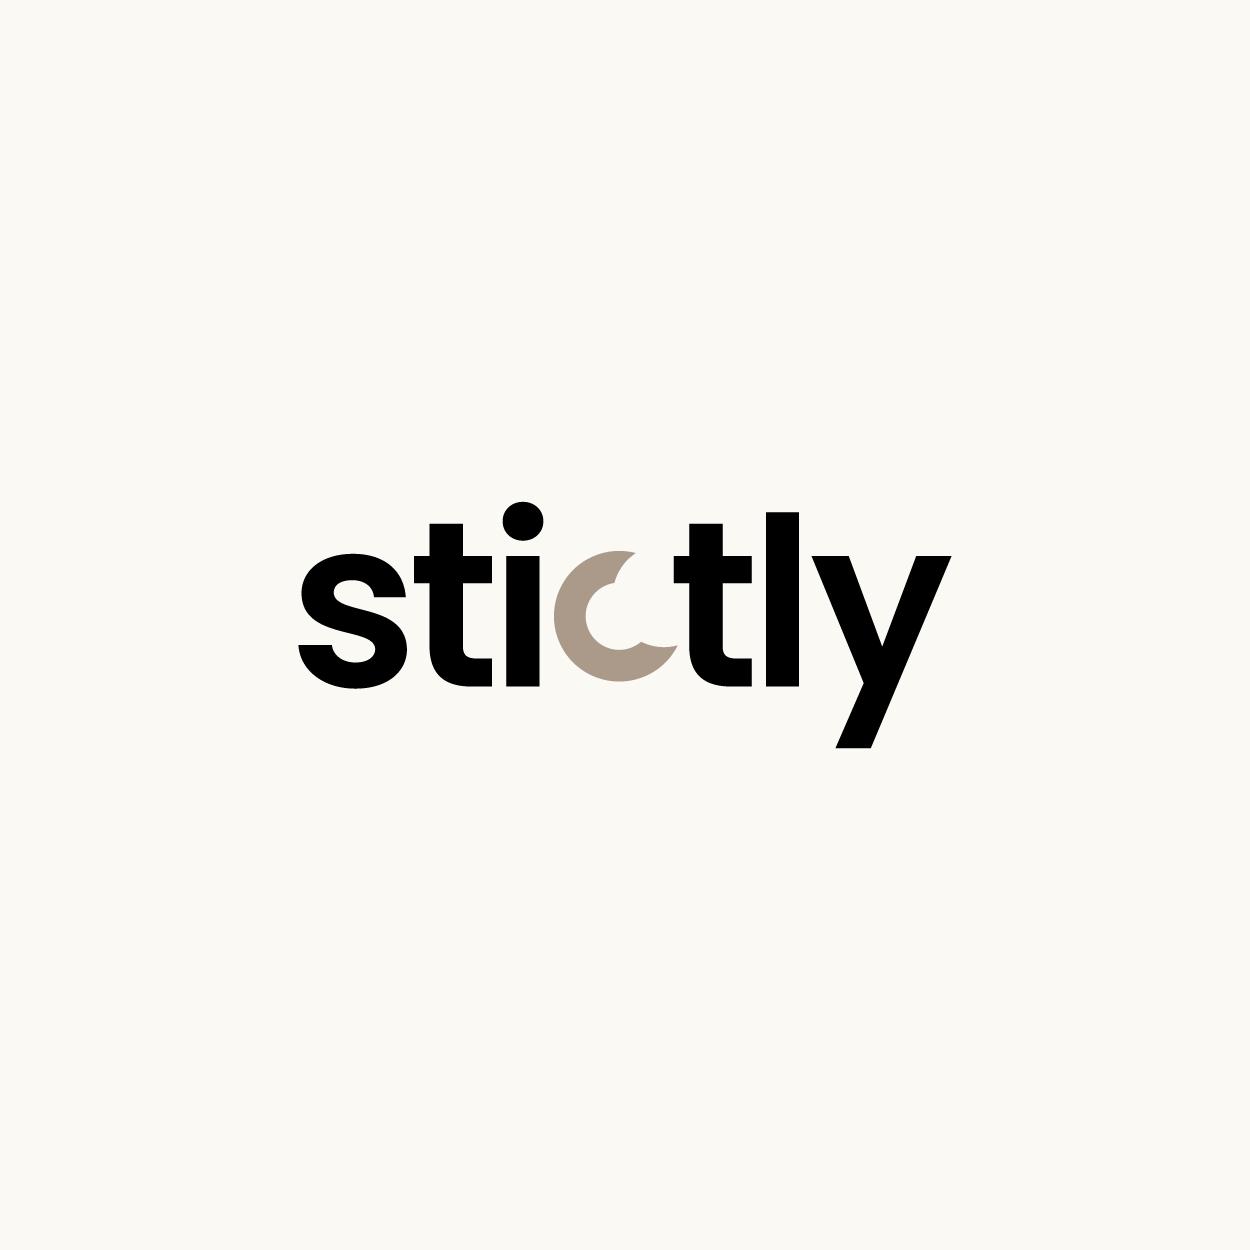 Stictly's images